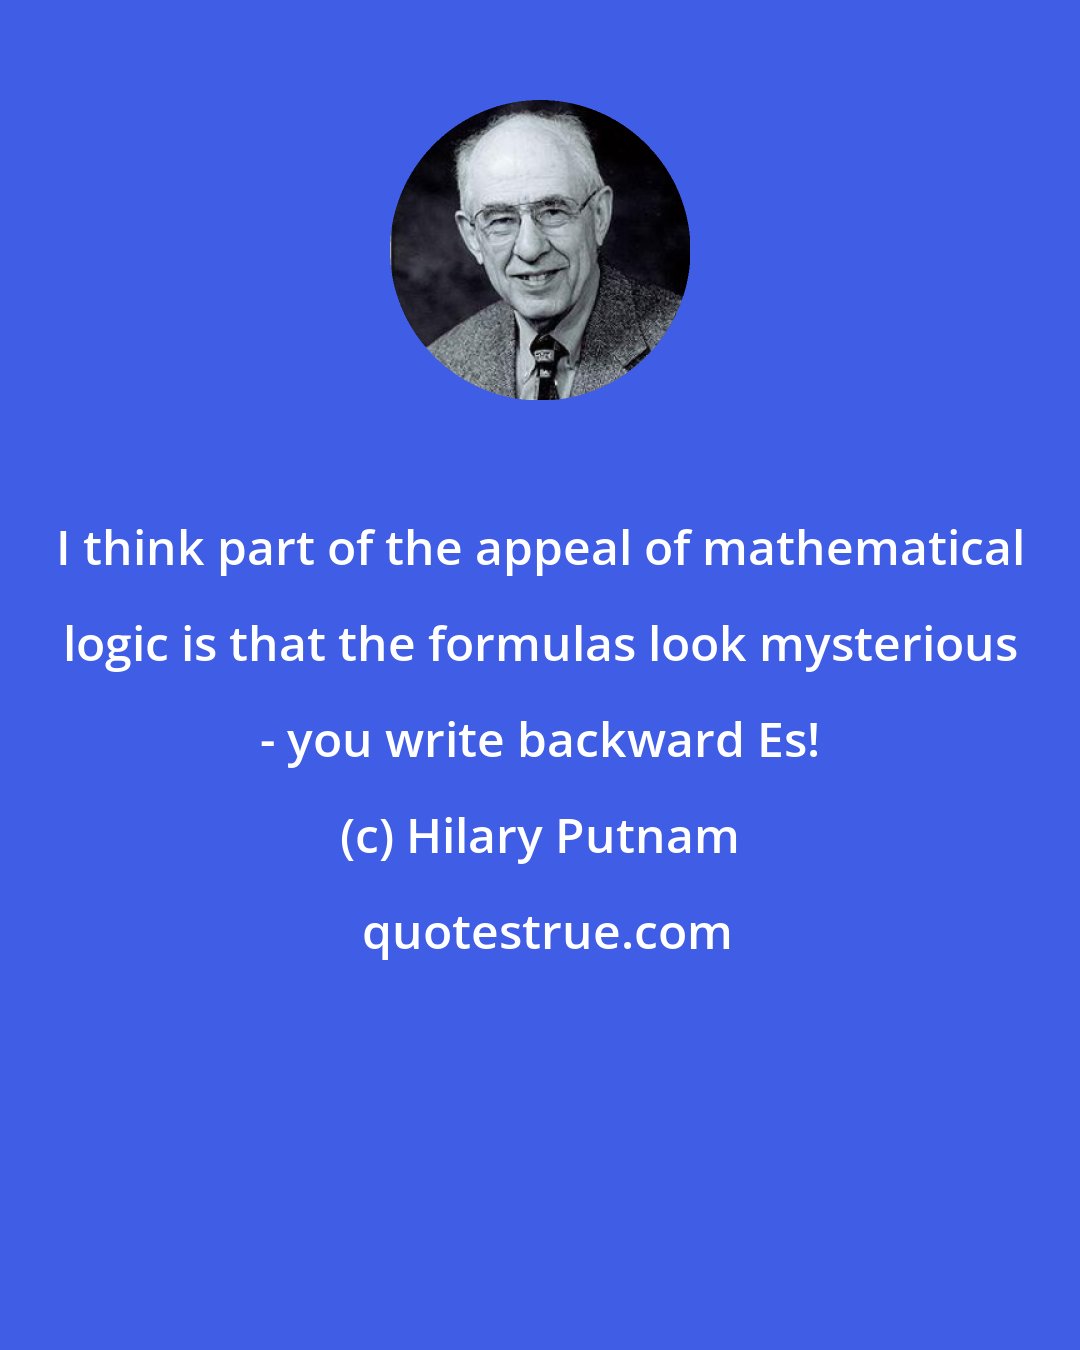 Hilary Putnam: I think part of the appeal of mathematical logic is that the formulas look mysterious - you write backward Es!